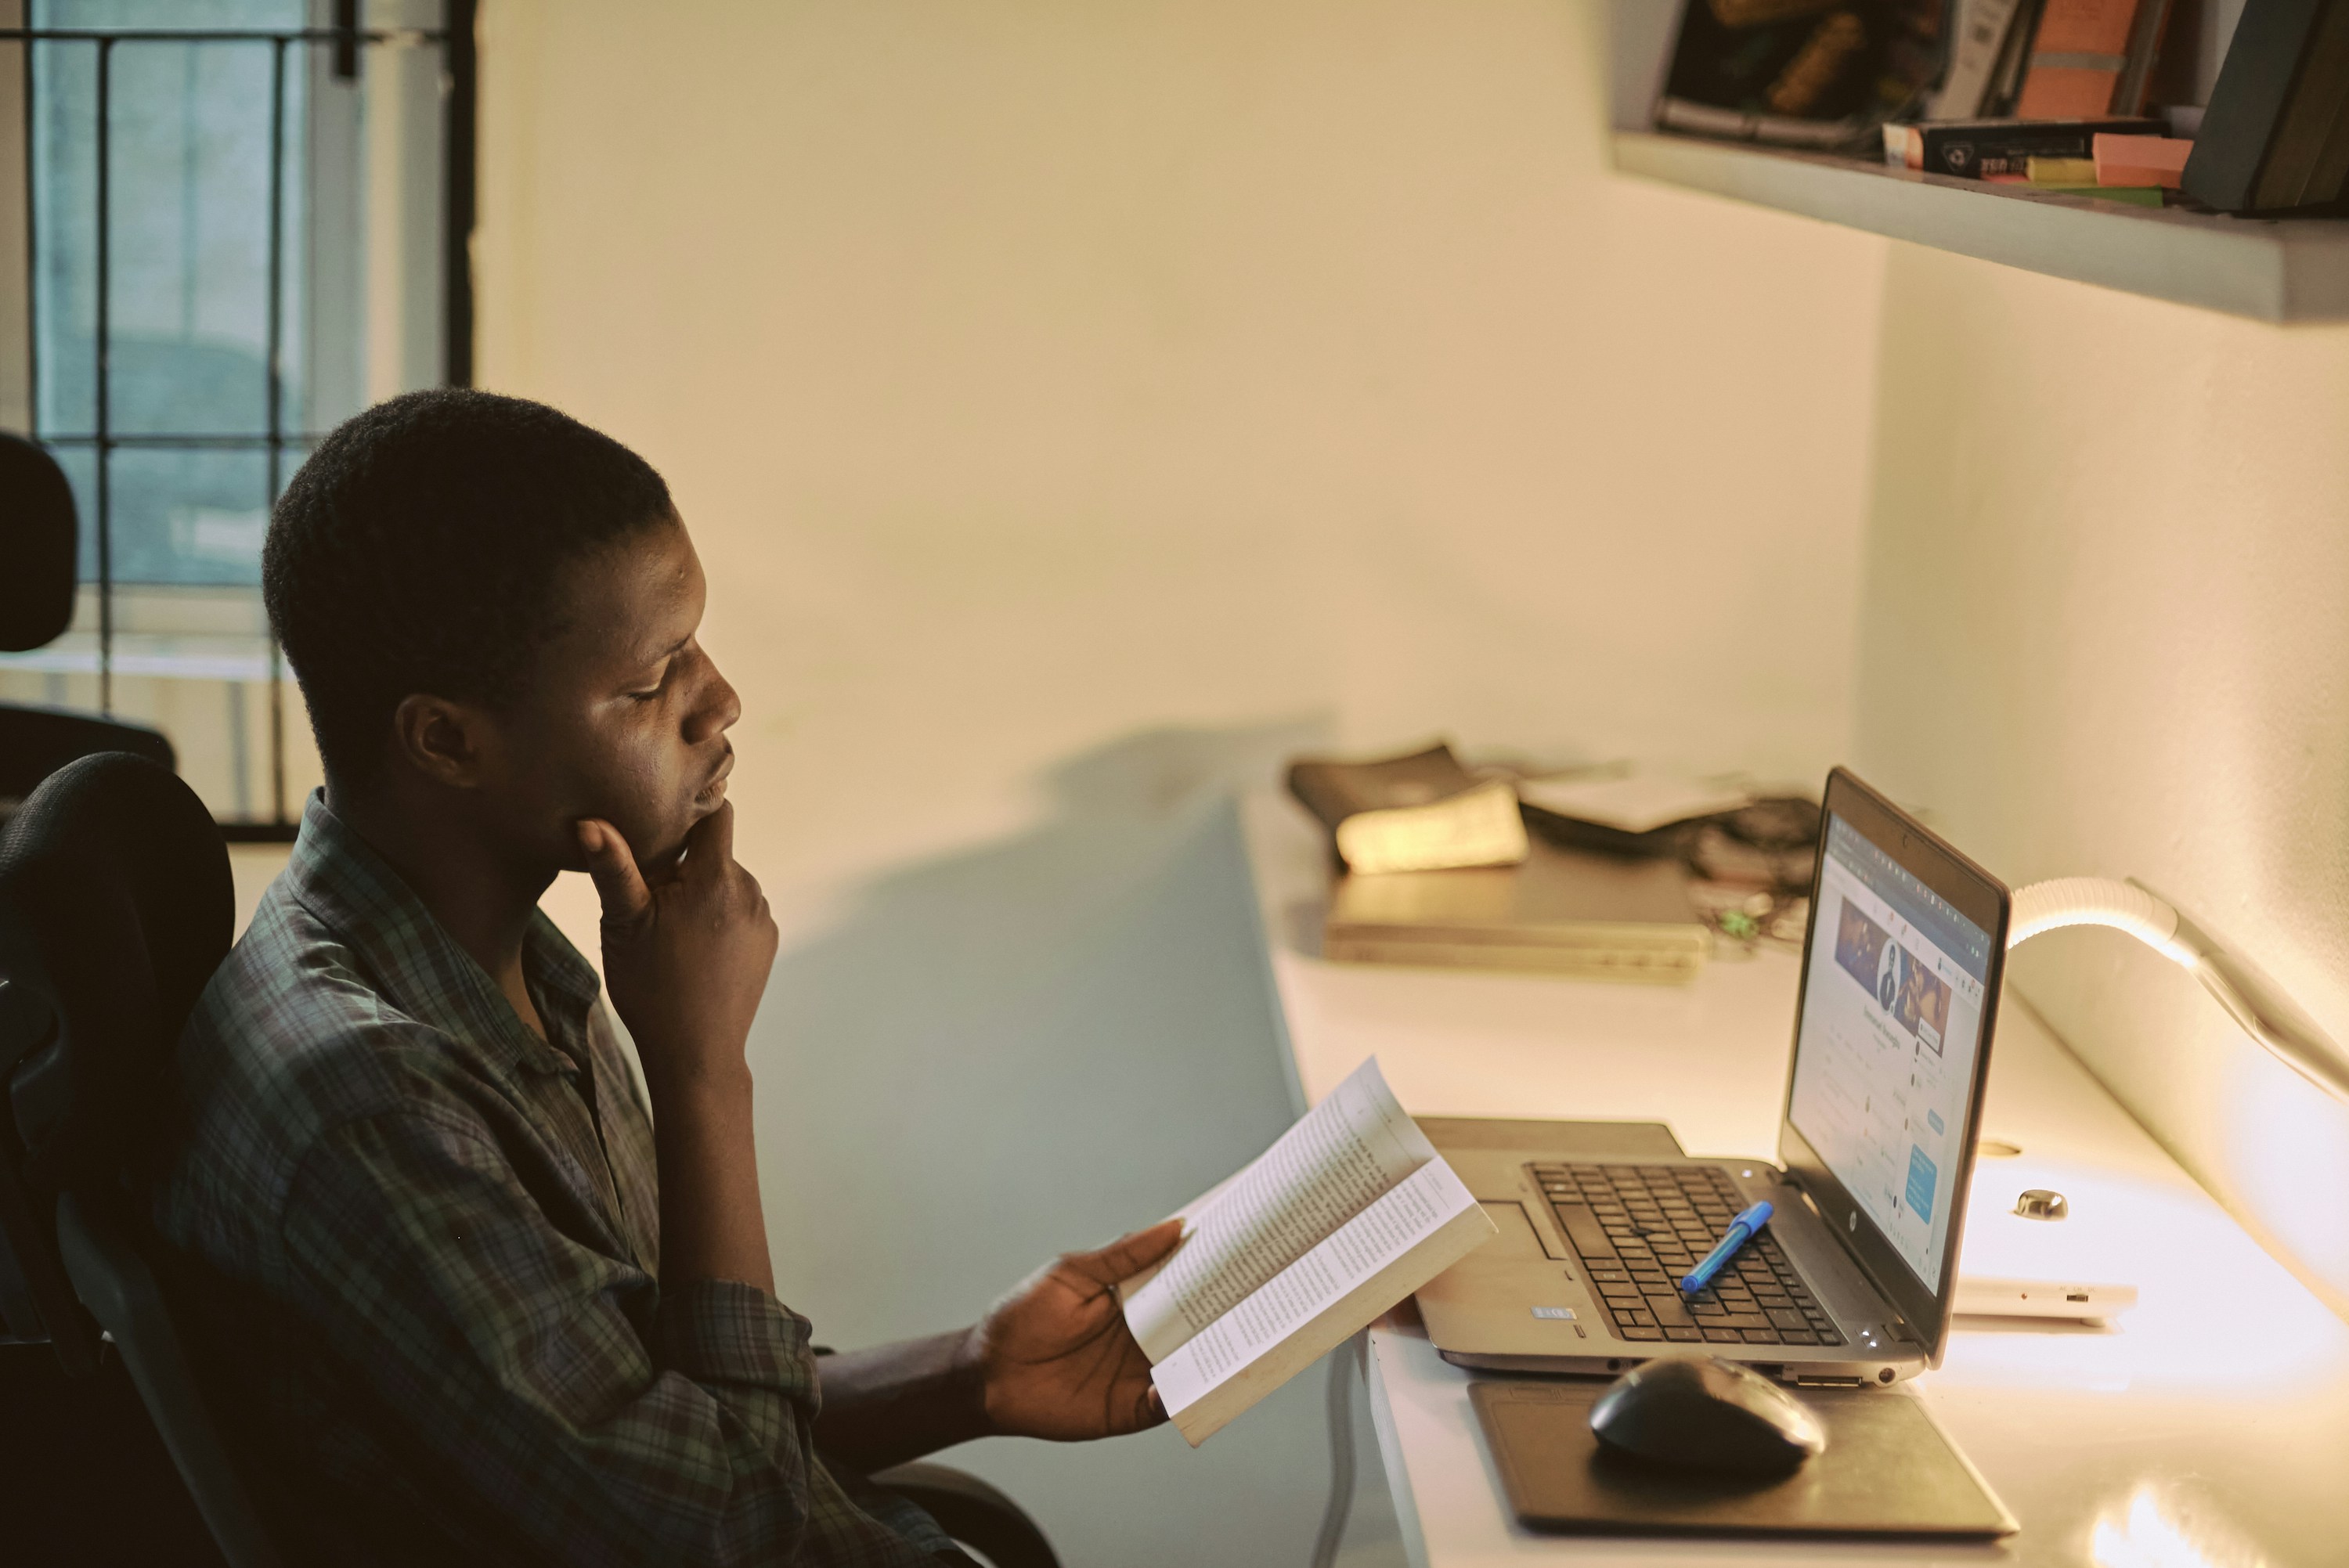 Portrait of a creative African man taking a break from work to read with his workspace blurred in the background